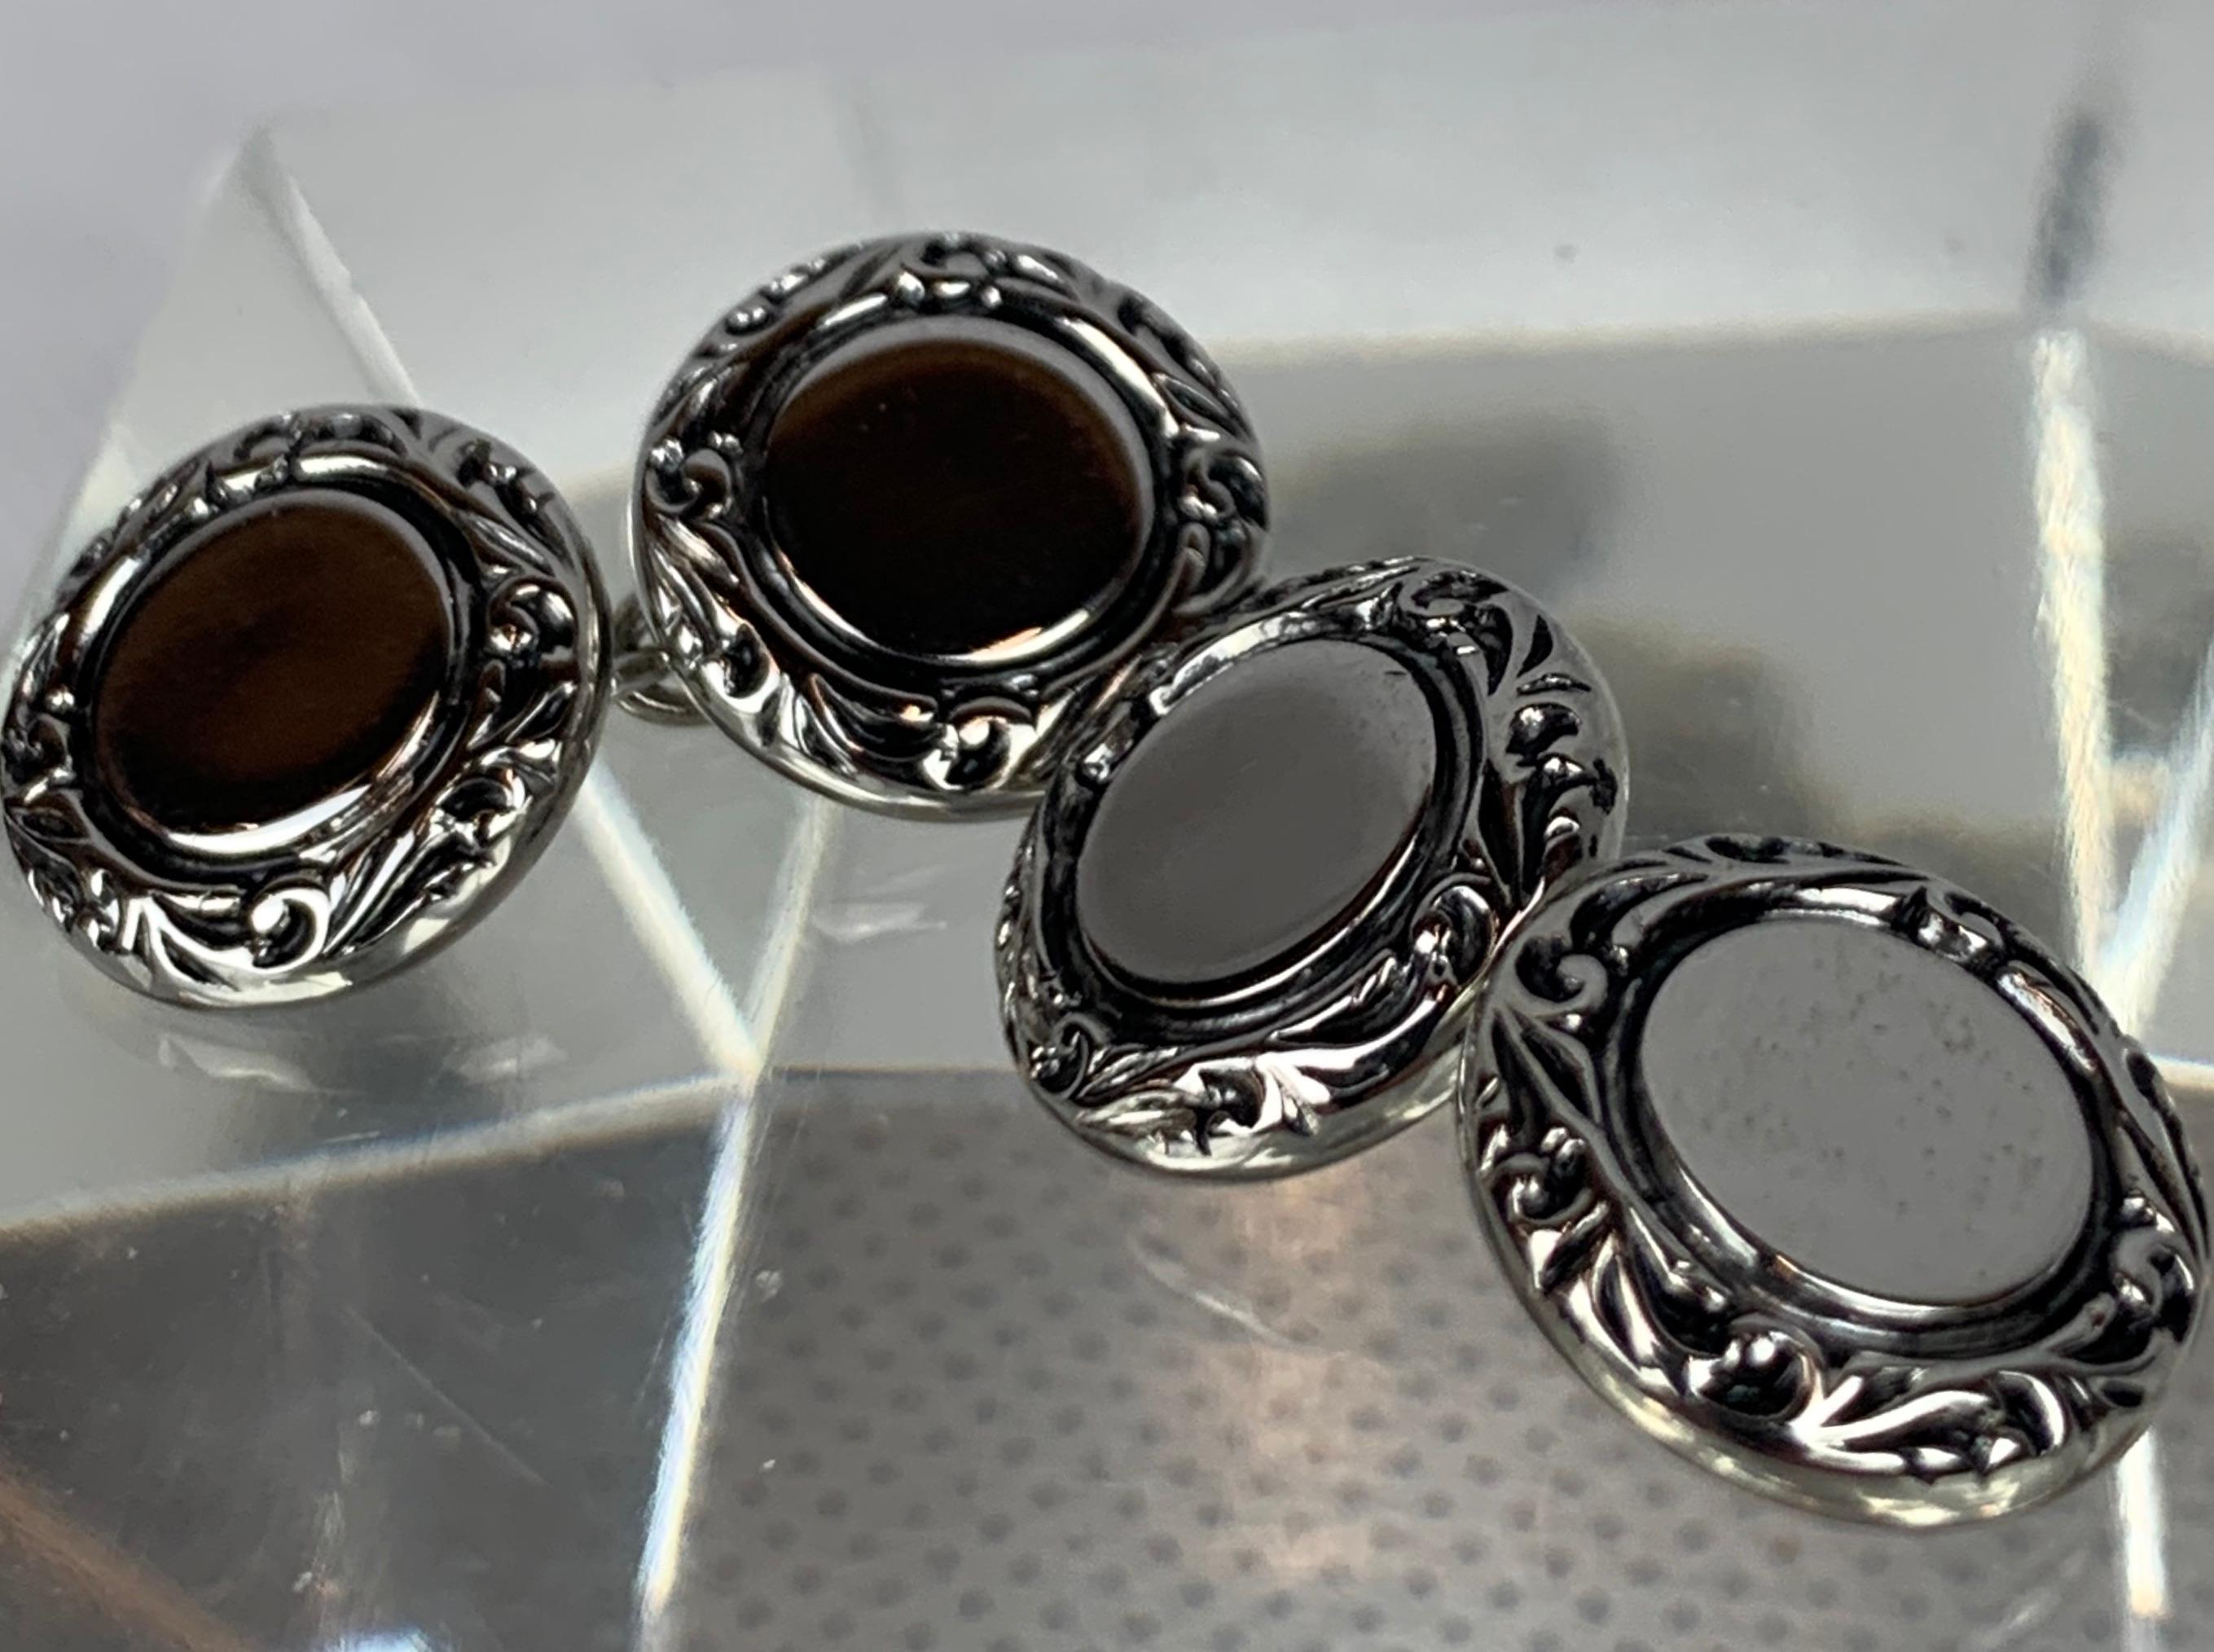 A Pair of Double Round Silver Tone Cufflinks with Scrolled Raised Borders For Sale 2